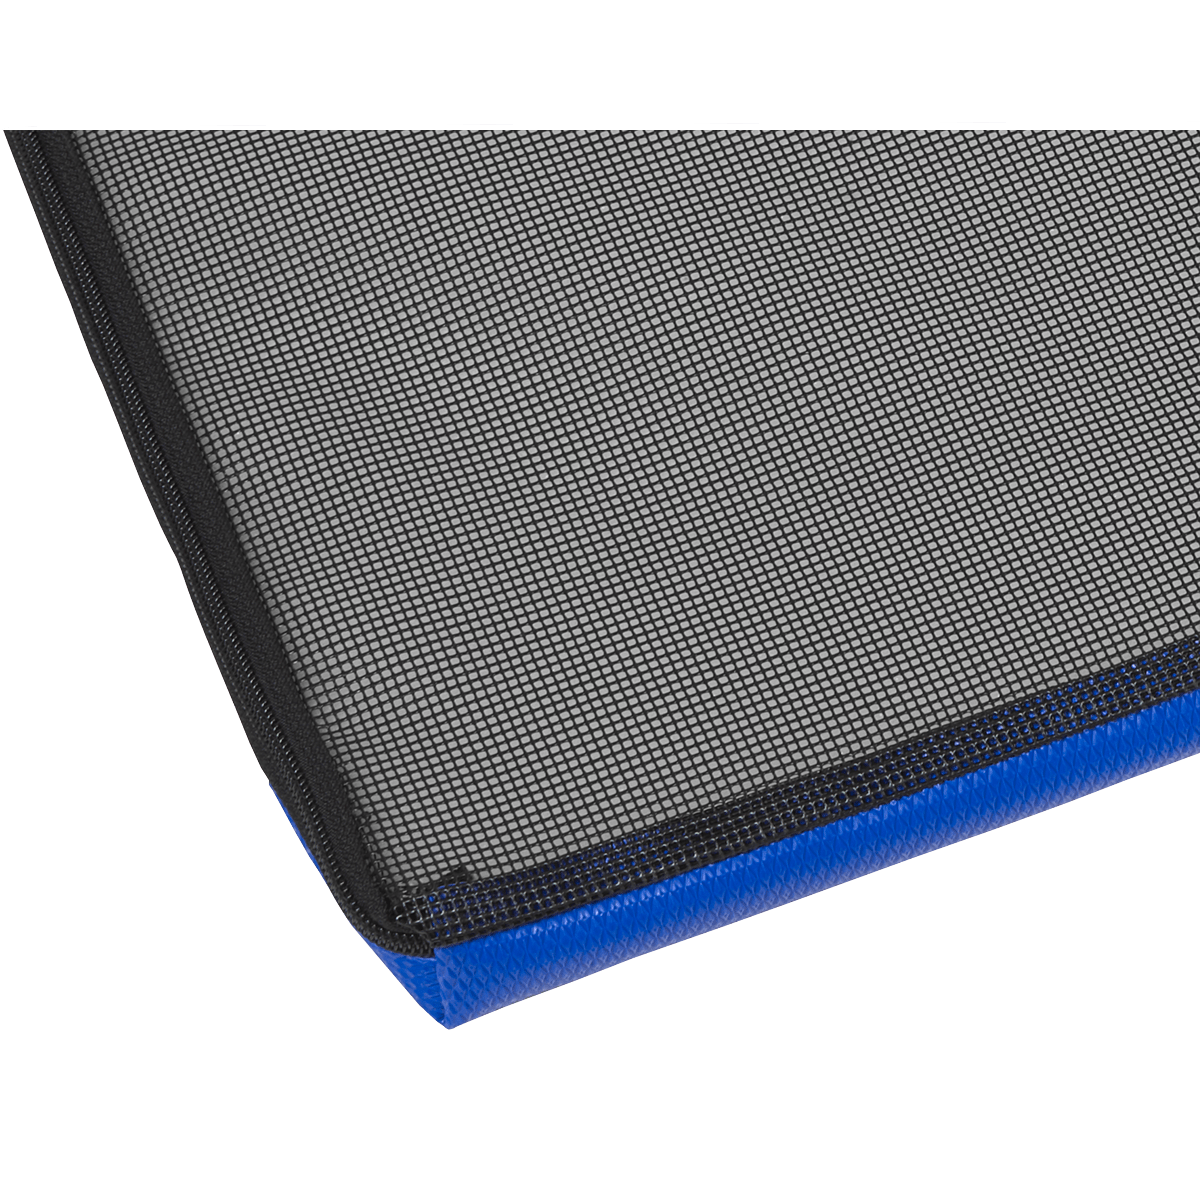 Sealey Disinfection Mat 900 x 1000mm Large DIML